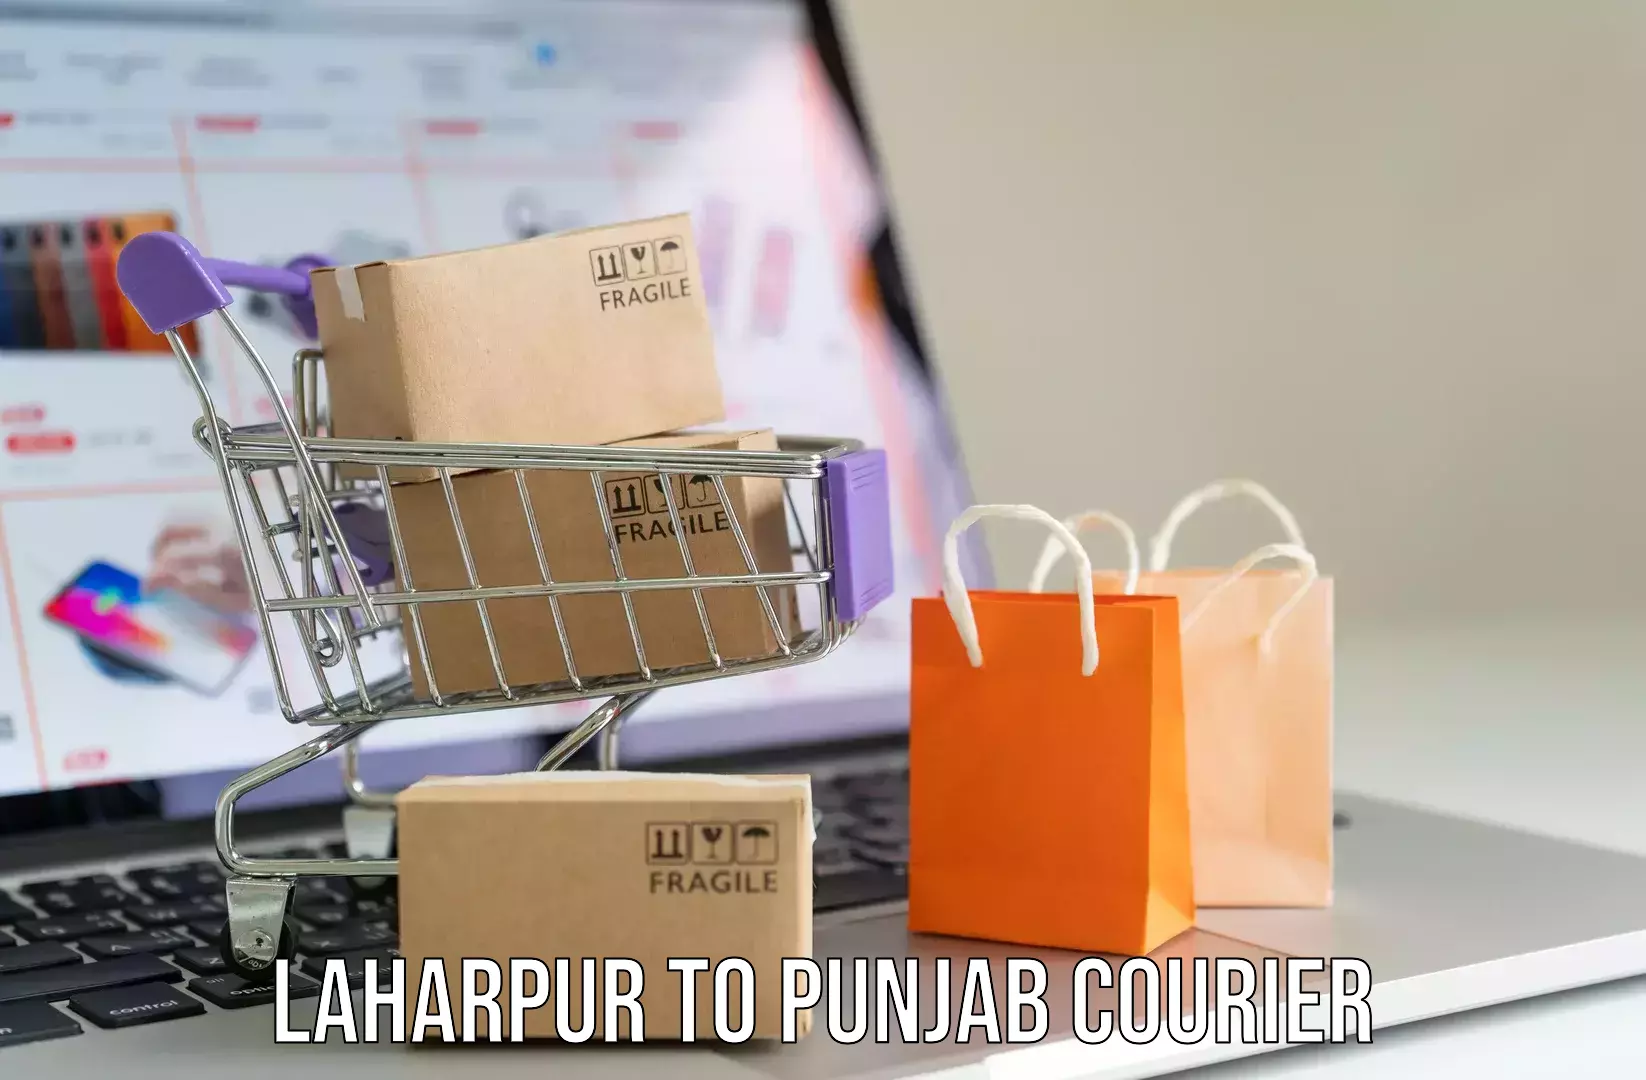 Luggage delivery system Laharpur to Punjab